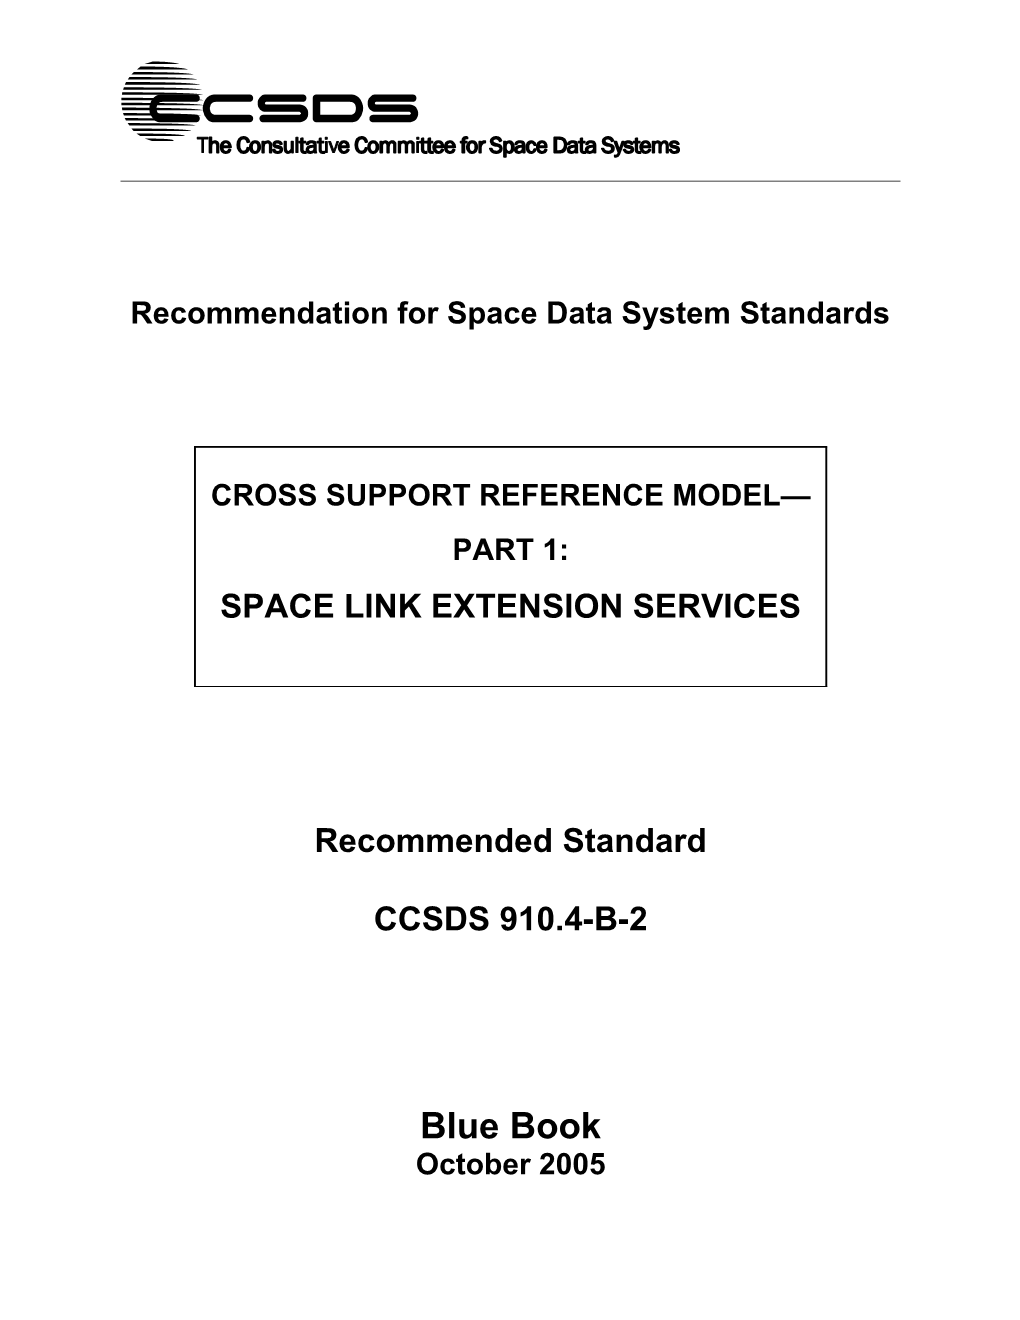 Cross Support Reference Model Part 1: Space Link Extension Services